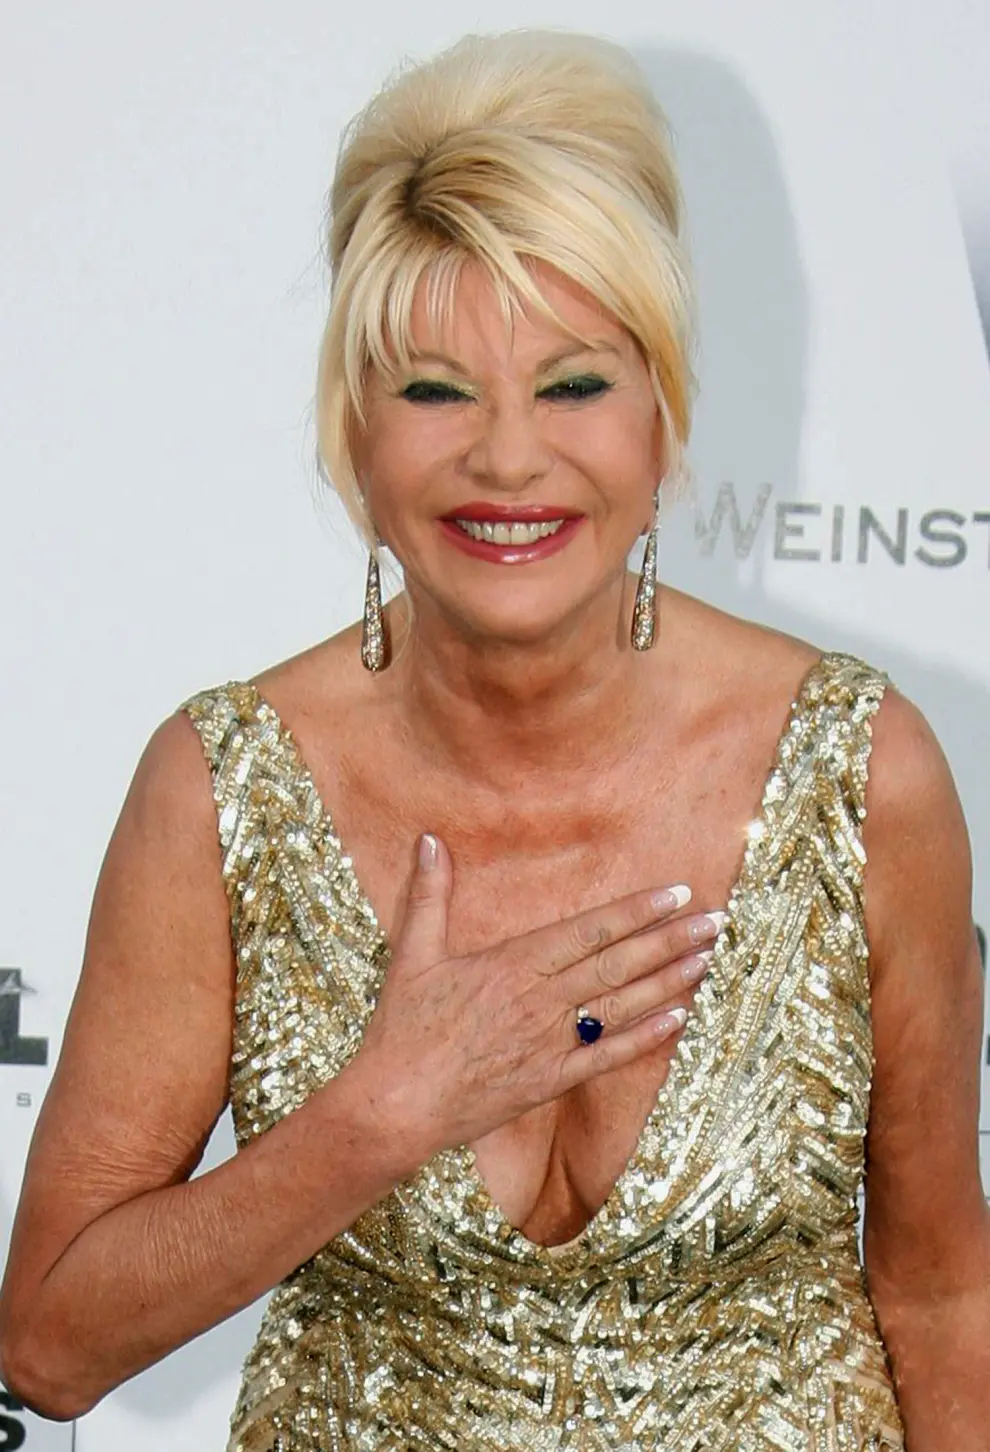 FILE PHOTO: Businesswoman Ivana Trump  arrives on the carpet for the amfAR's Cinema Against AIDS 2009 event in Antibes during the 62nd Cannes Film Festival